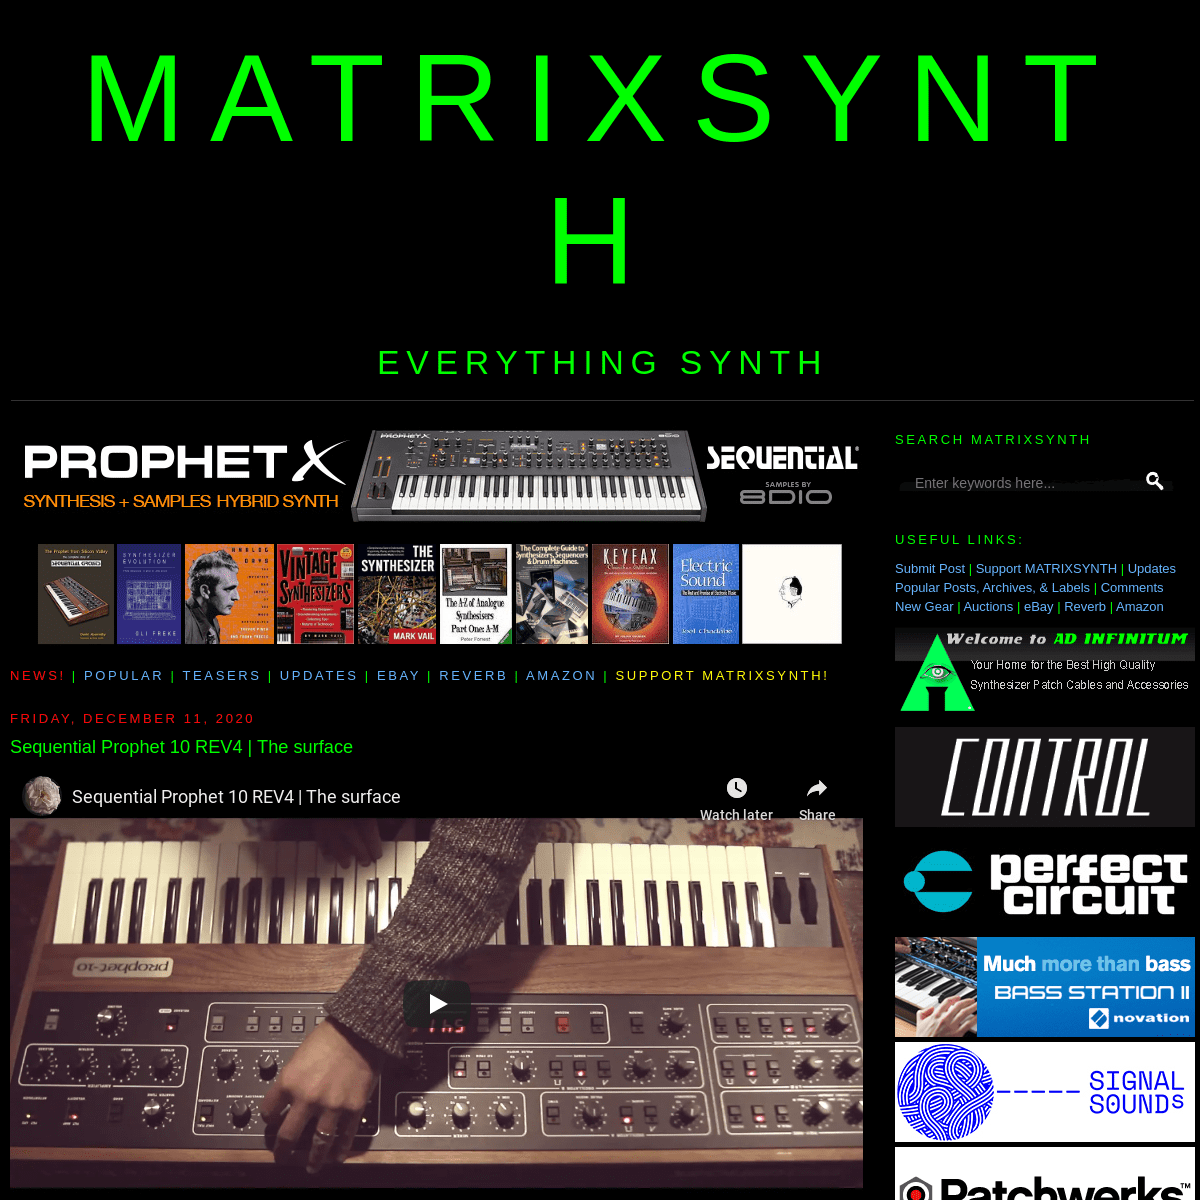 A complete backup of matrixsynth.com